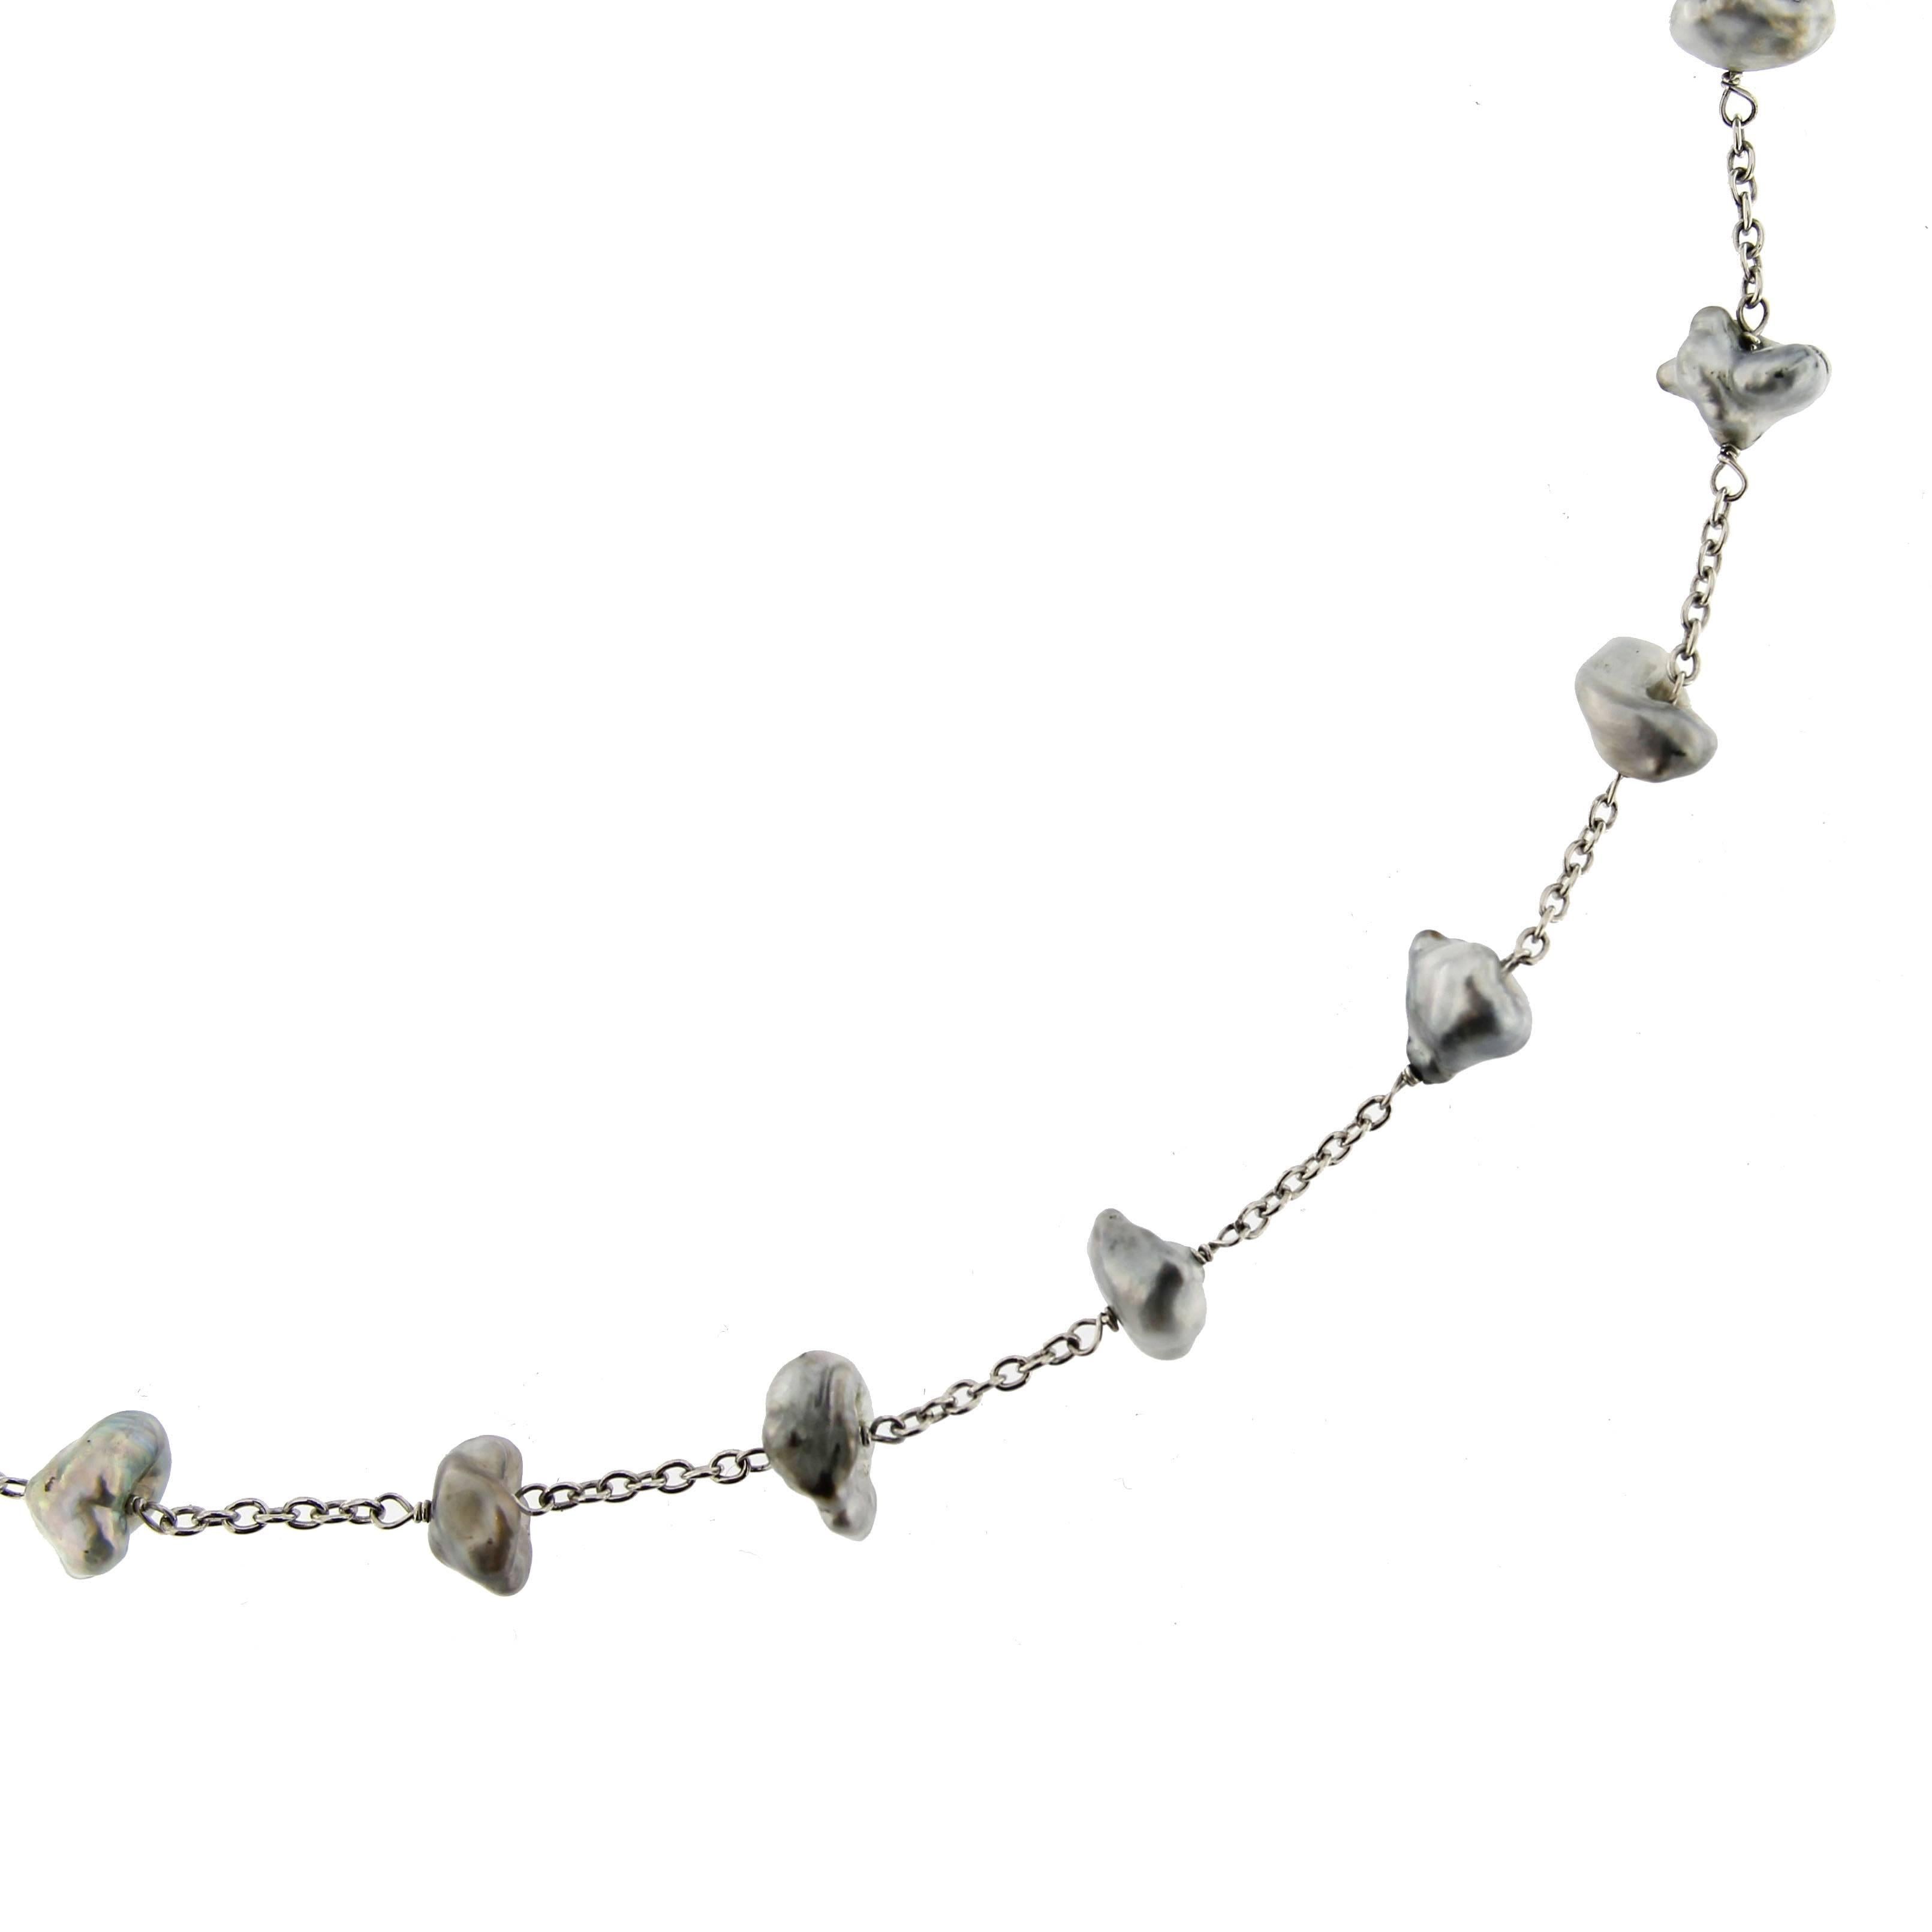 Alex Jona design collection, hand crafted in Italy, 18 karat white gold, 17.71 in/ 45 cm long necklace with 23 Tahiti Keshi grey pearls.

Alex Jona jewels stand out, not only for their special design and for the excellent quality of the gemstones,